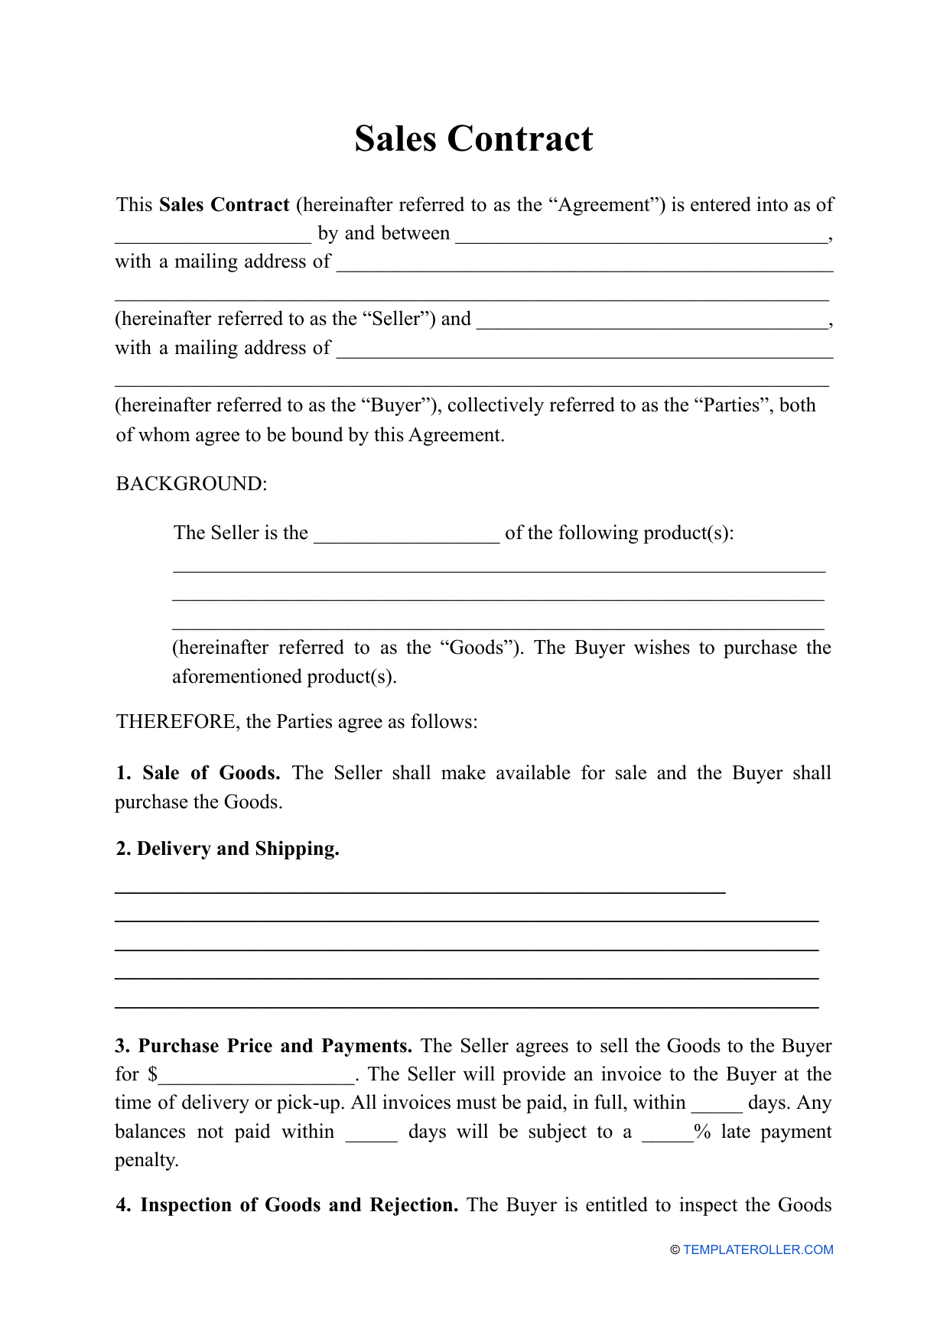 Sales Contract Template Download Printable PDF Templateroller